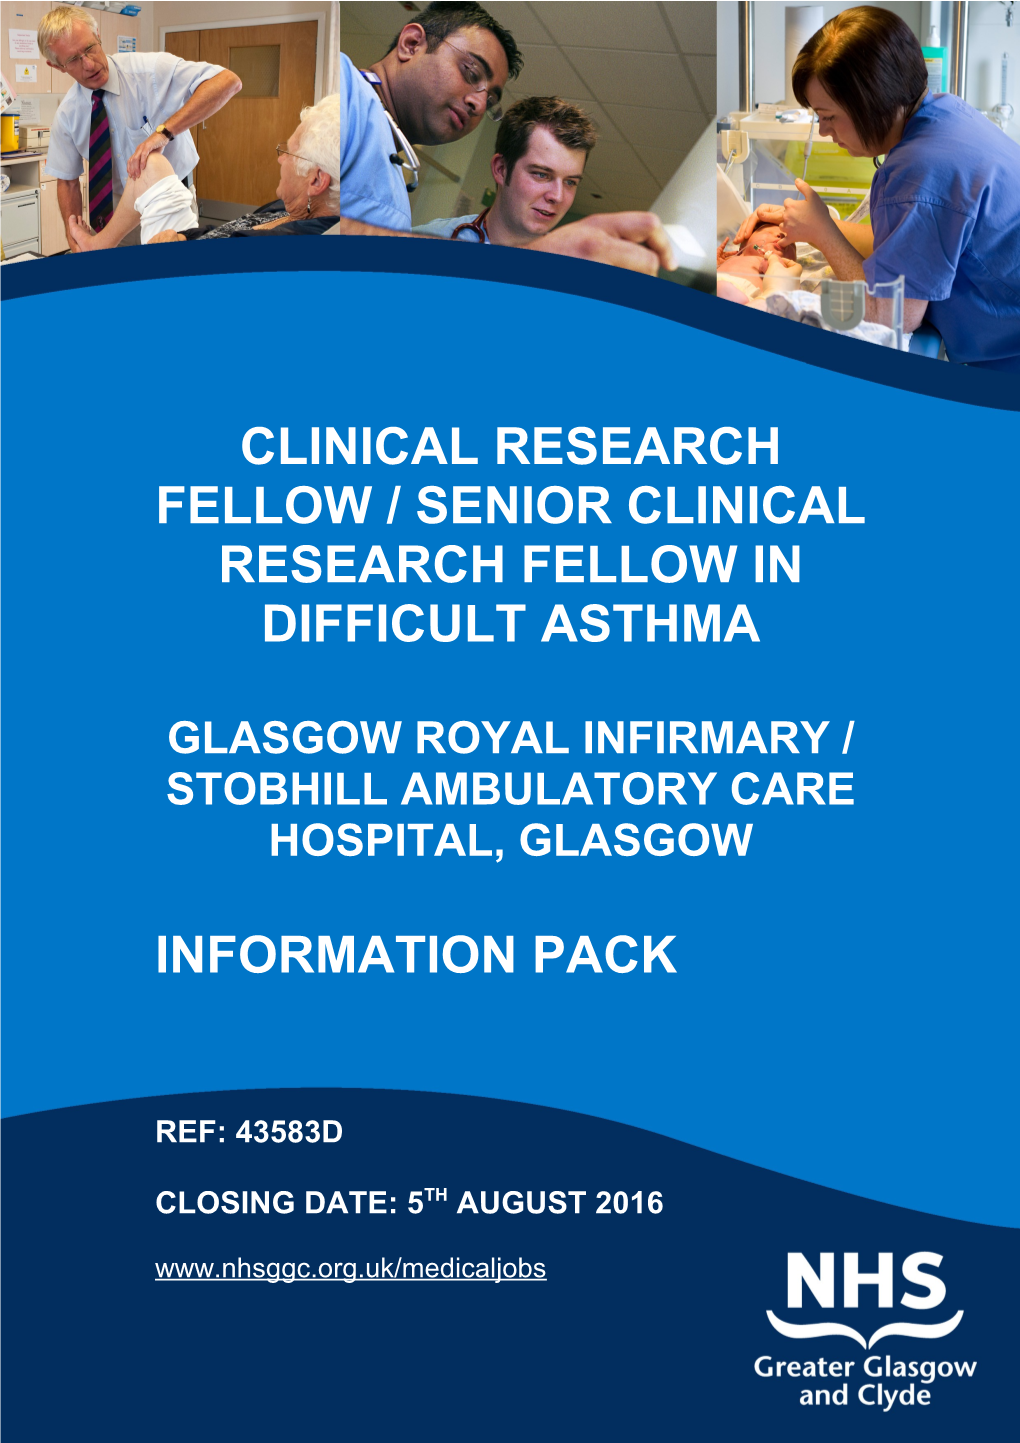 Clinical RESEARCH Fellow / SENIOR Clinical RESEARCH FELLOW in Difficult ASTHMA